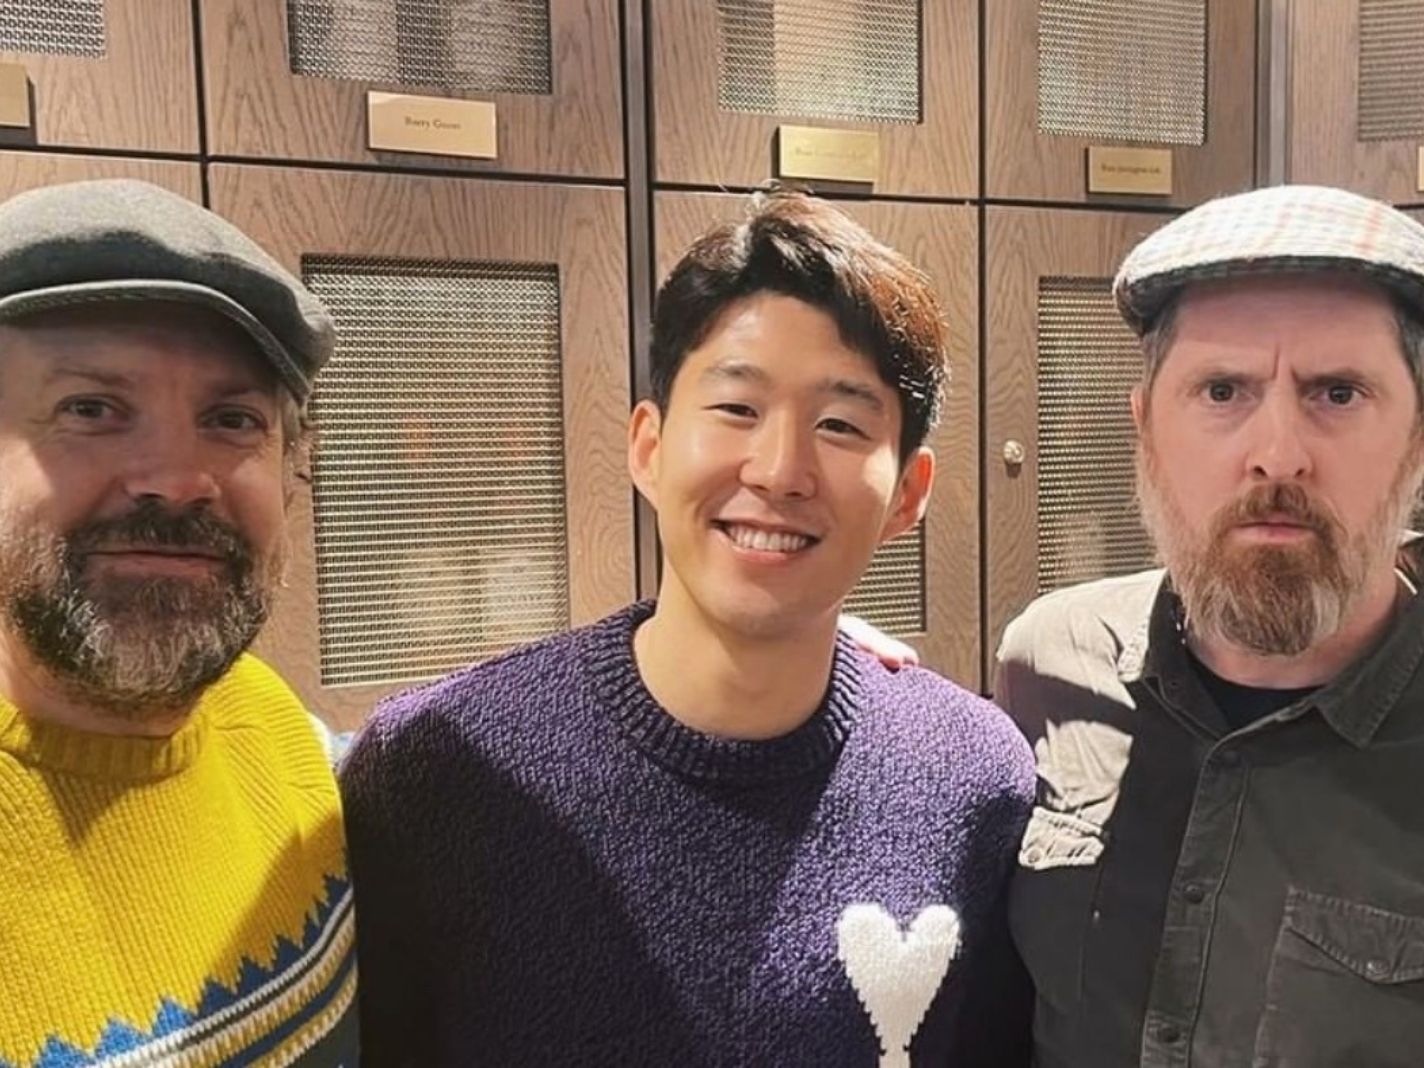 Son Heung-min hangs out with Ted Lasso stars, one of whom is a massive Arsenal fan